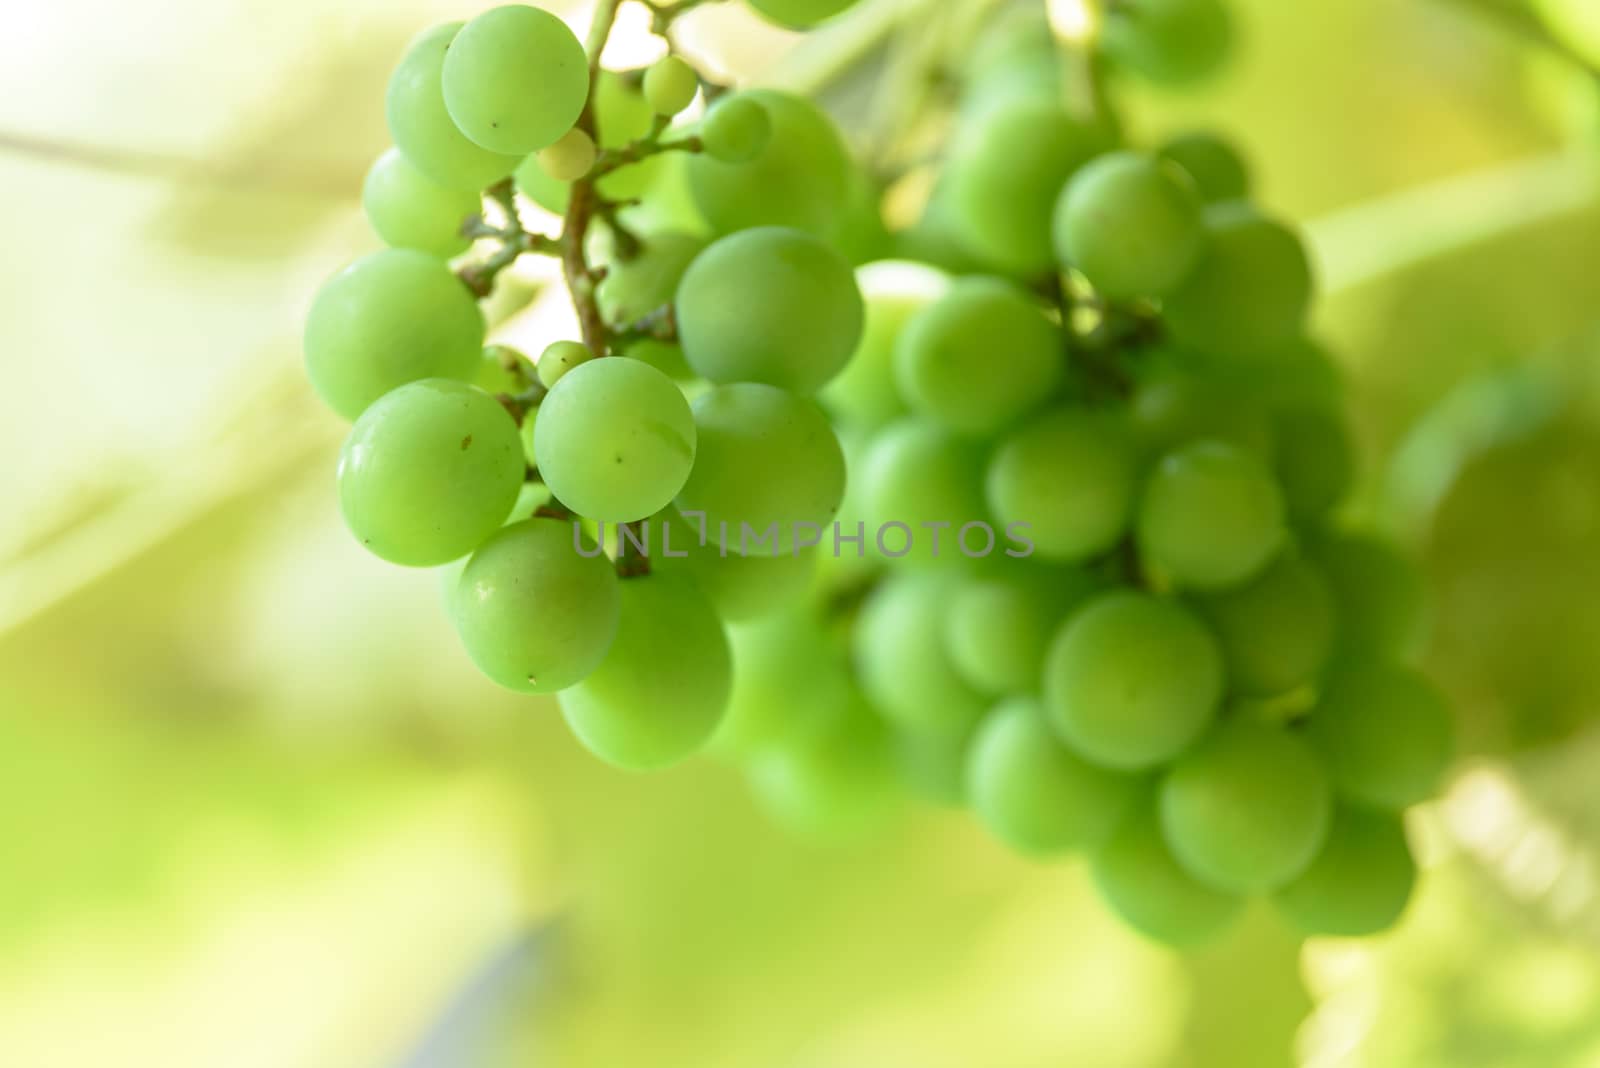 Grapes in the sun by wdnet_studio